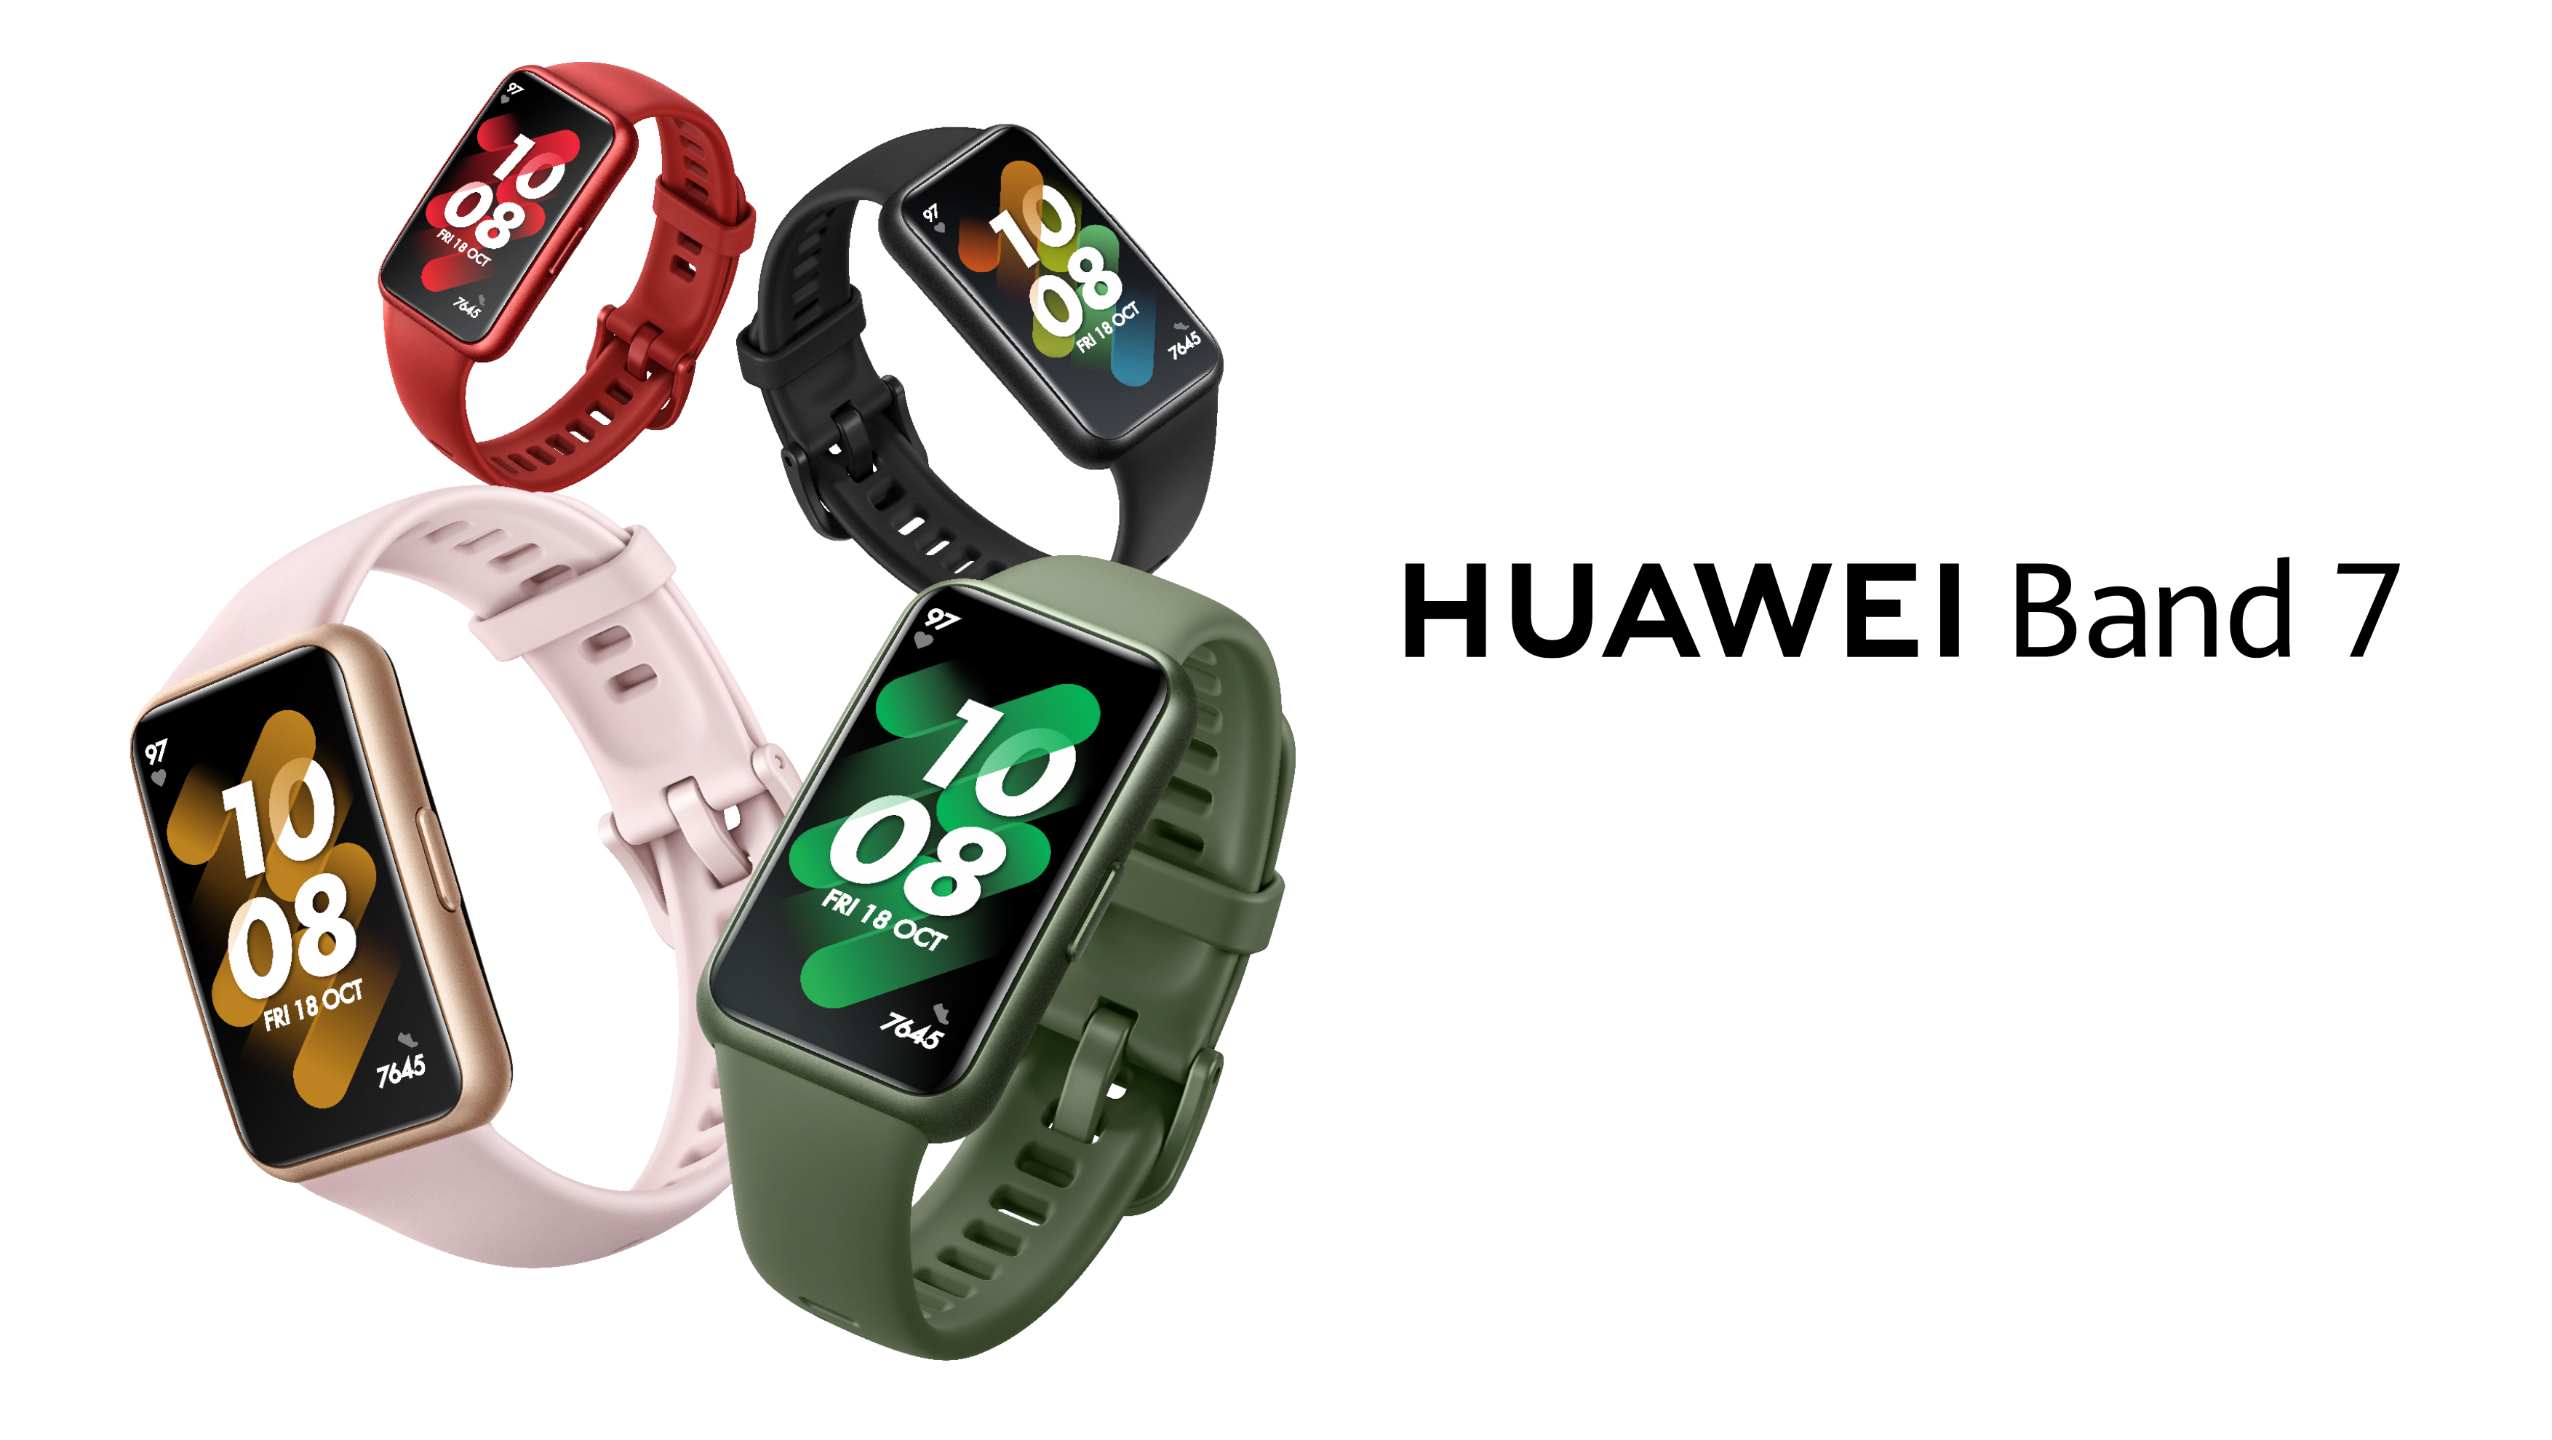 Huawei Band 7: Fitness tracker arrives in Europe for €59.99 with days battery life, an display and a SpO2 sensor NotebookCheck.net News